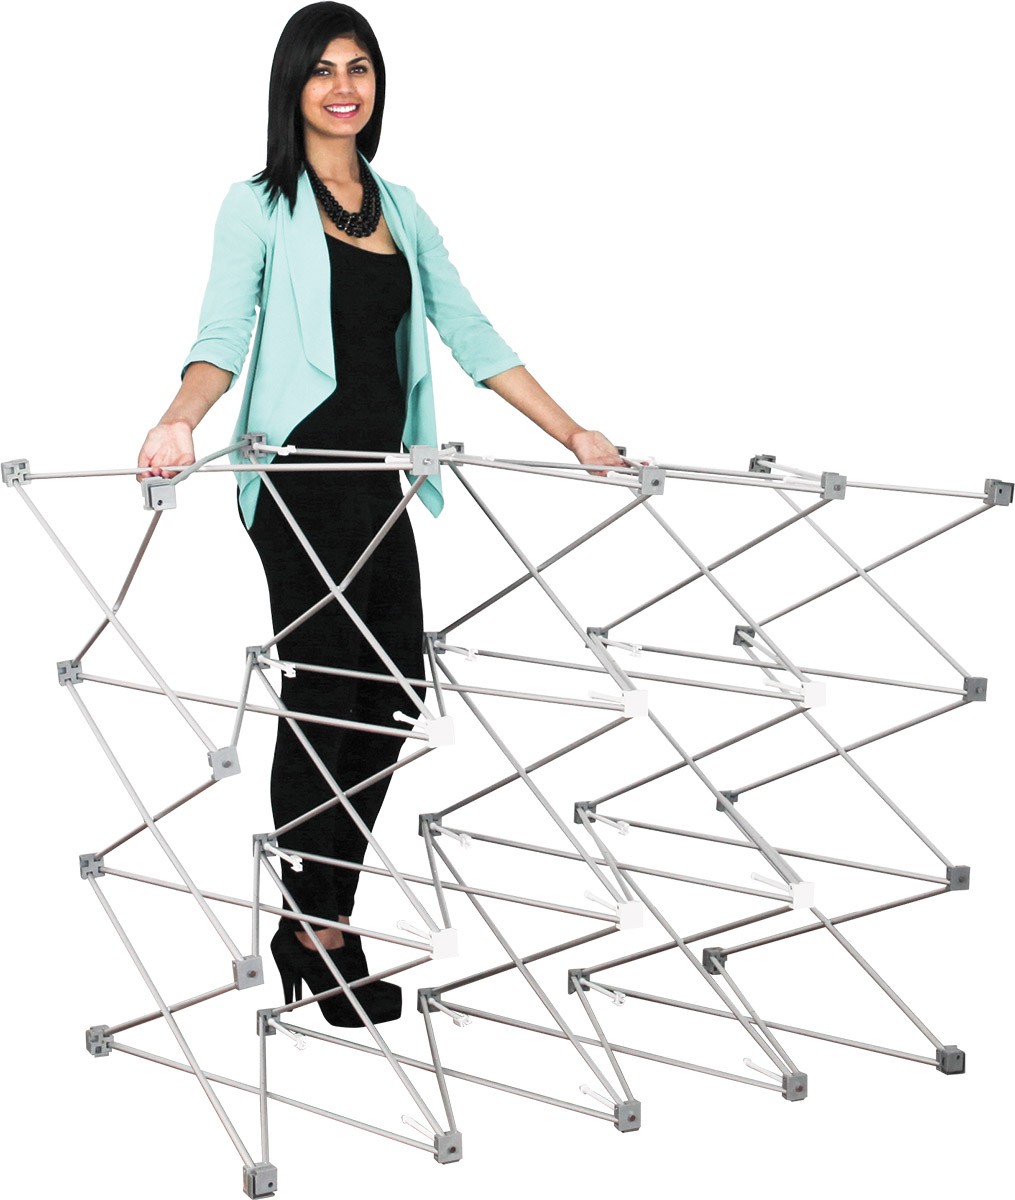 Embrace 5' Extra Tall Tension Fabric Display